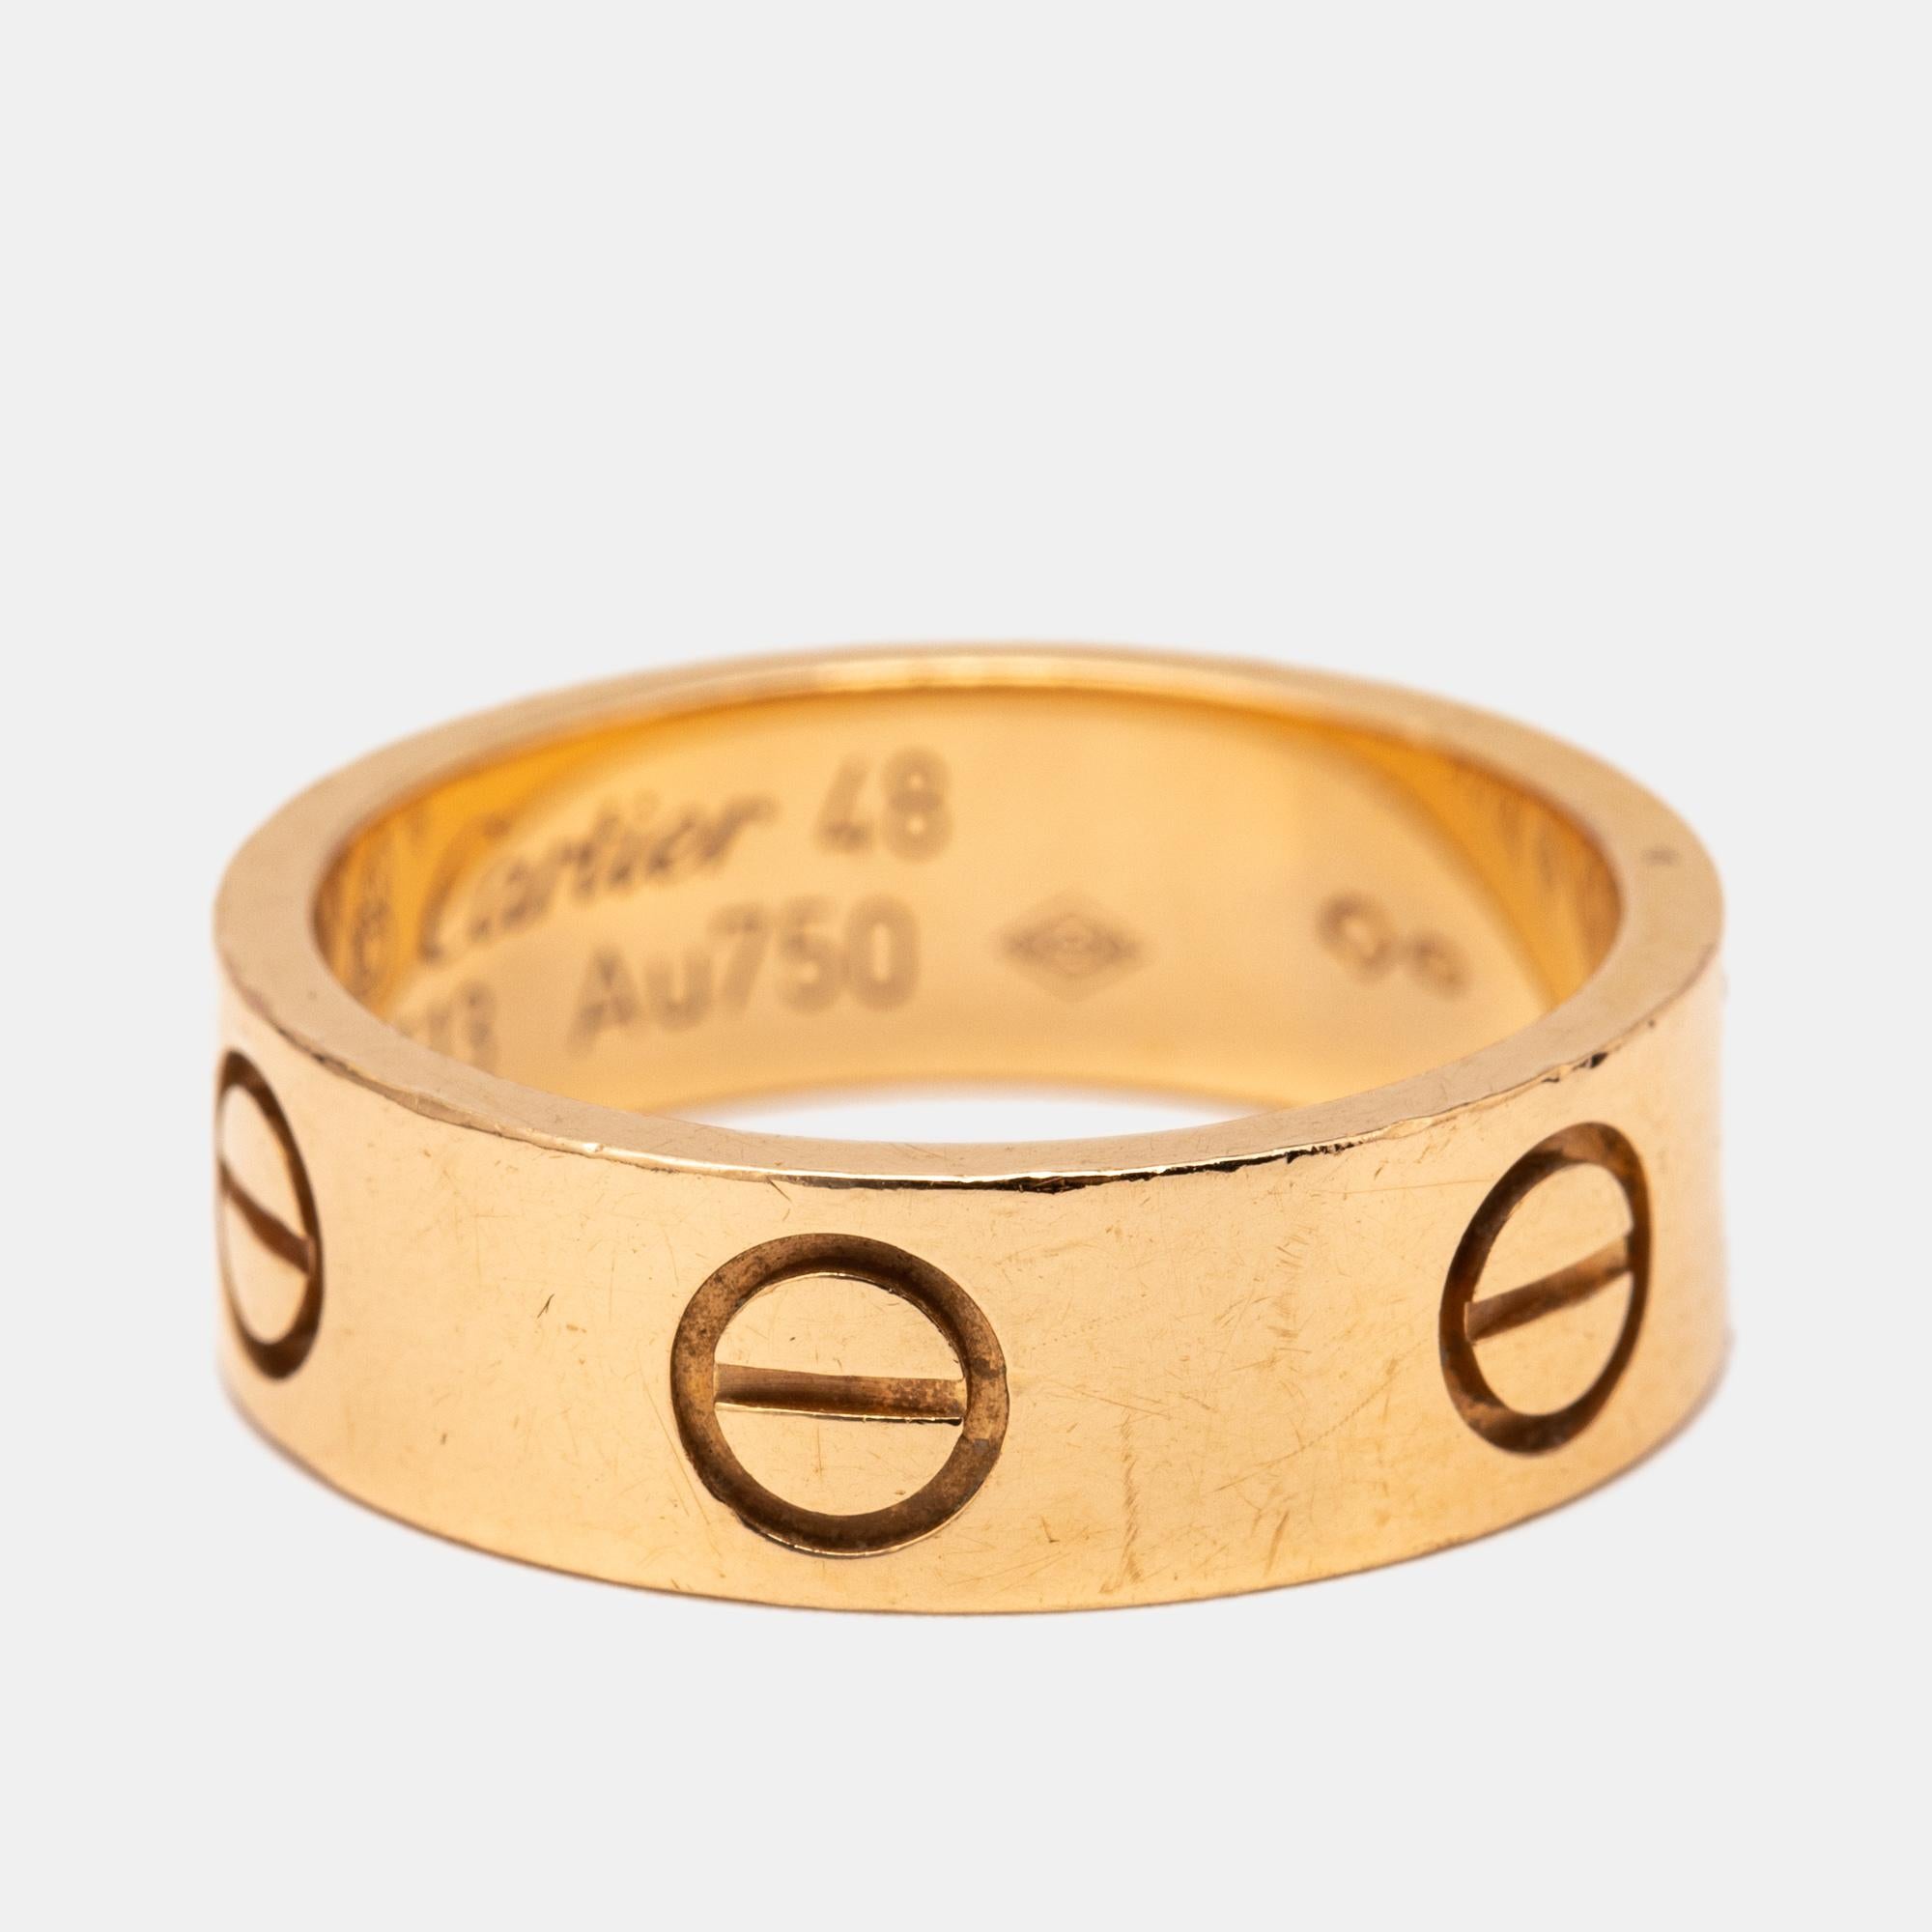 Aesthetic Movement Cartier Love 18k Rose Gold Ring Size 48